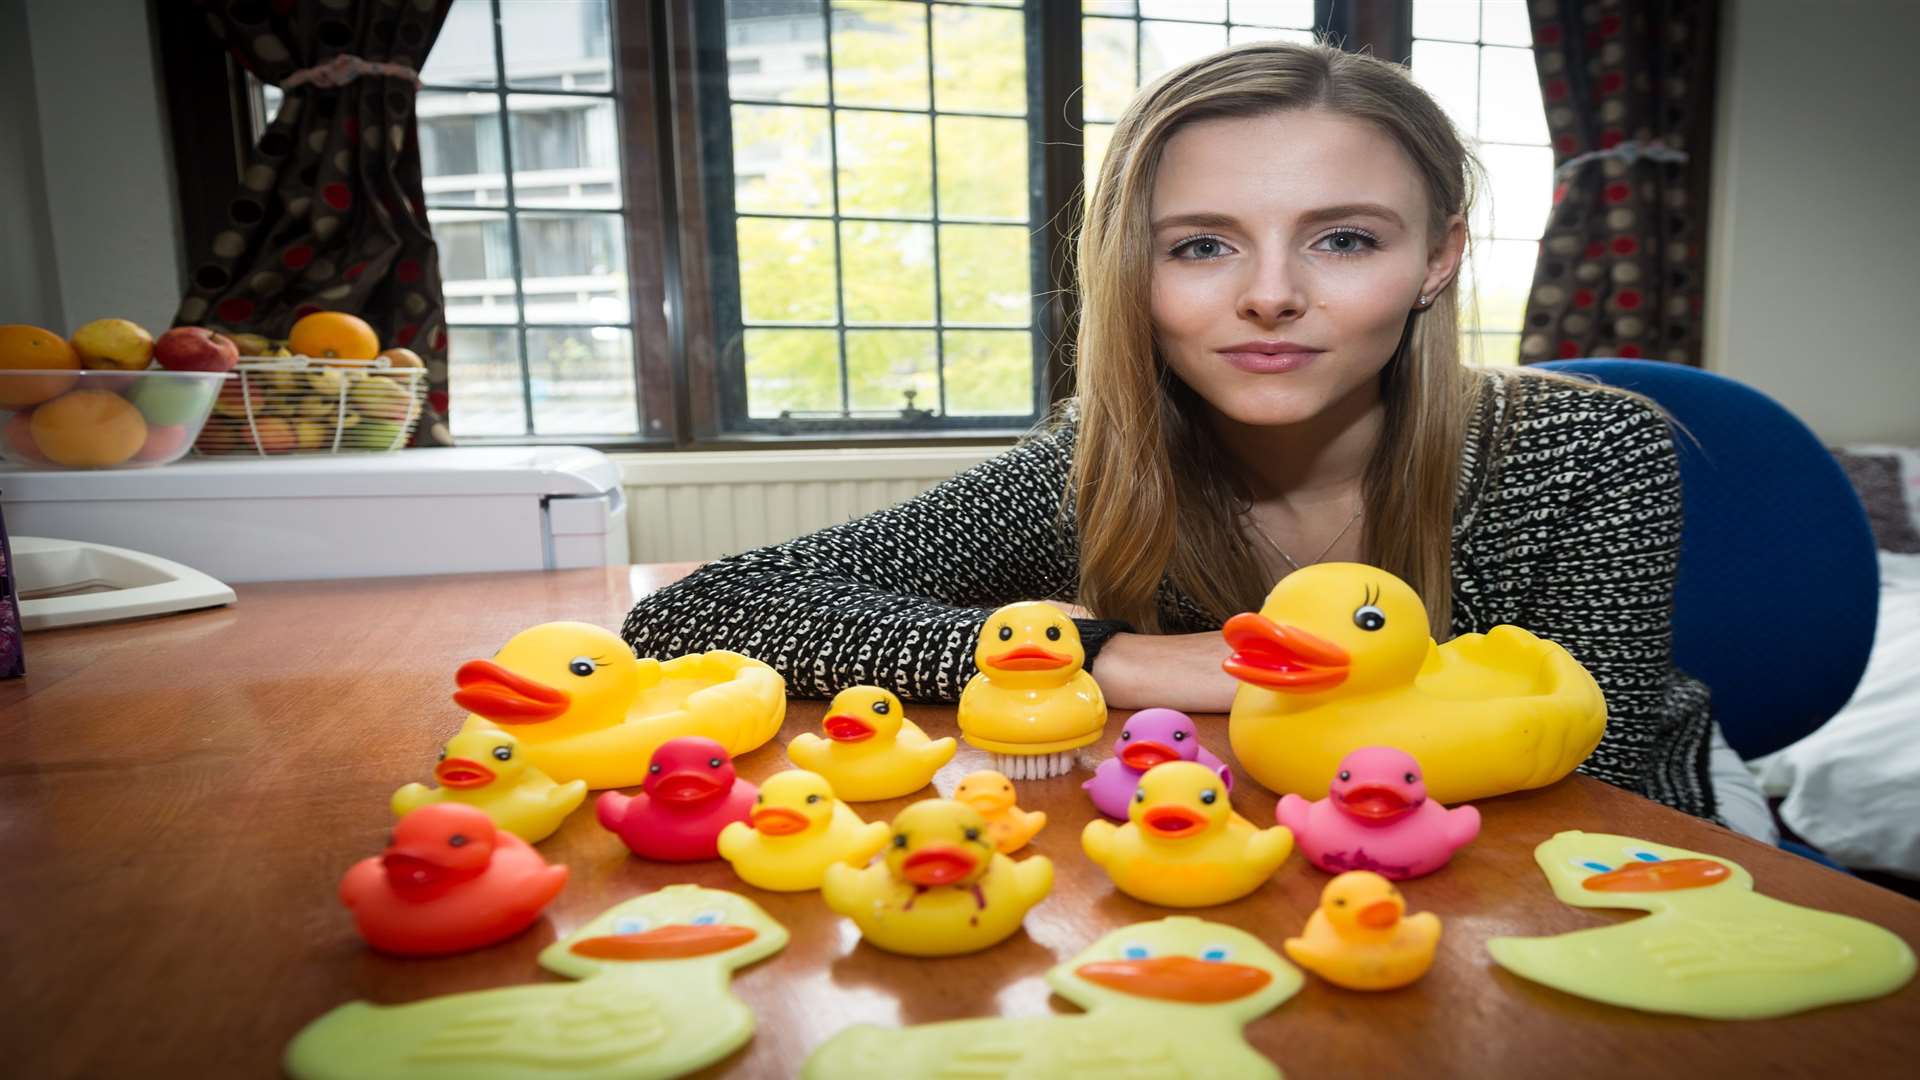 Abbie Coombs with some of the creepy plastic ducks sent by a stalker. Picture: SWNS